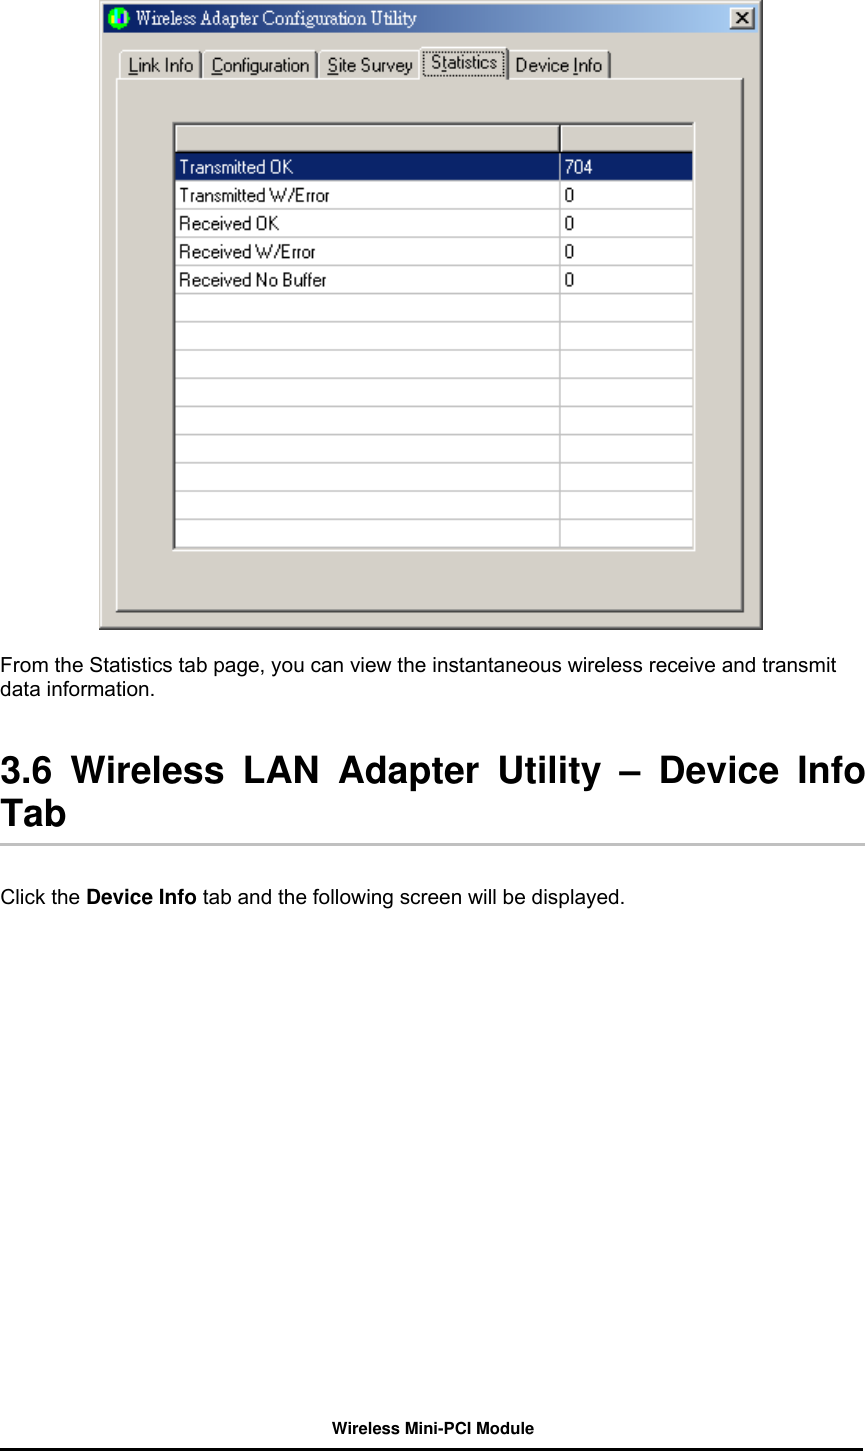 Wireless Mini-PCI Module      From the Statistics tab page, you can view the instantaneous wireless receive and transmit data information.     3.6 Wireless LAN Adapter Utility – Device Info Tab   Click the Device Info tab and the following screen will be displayed.   